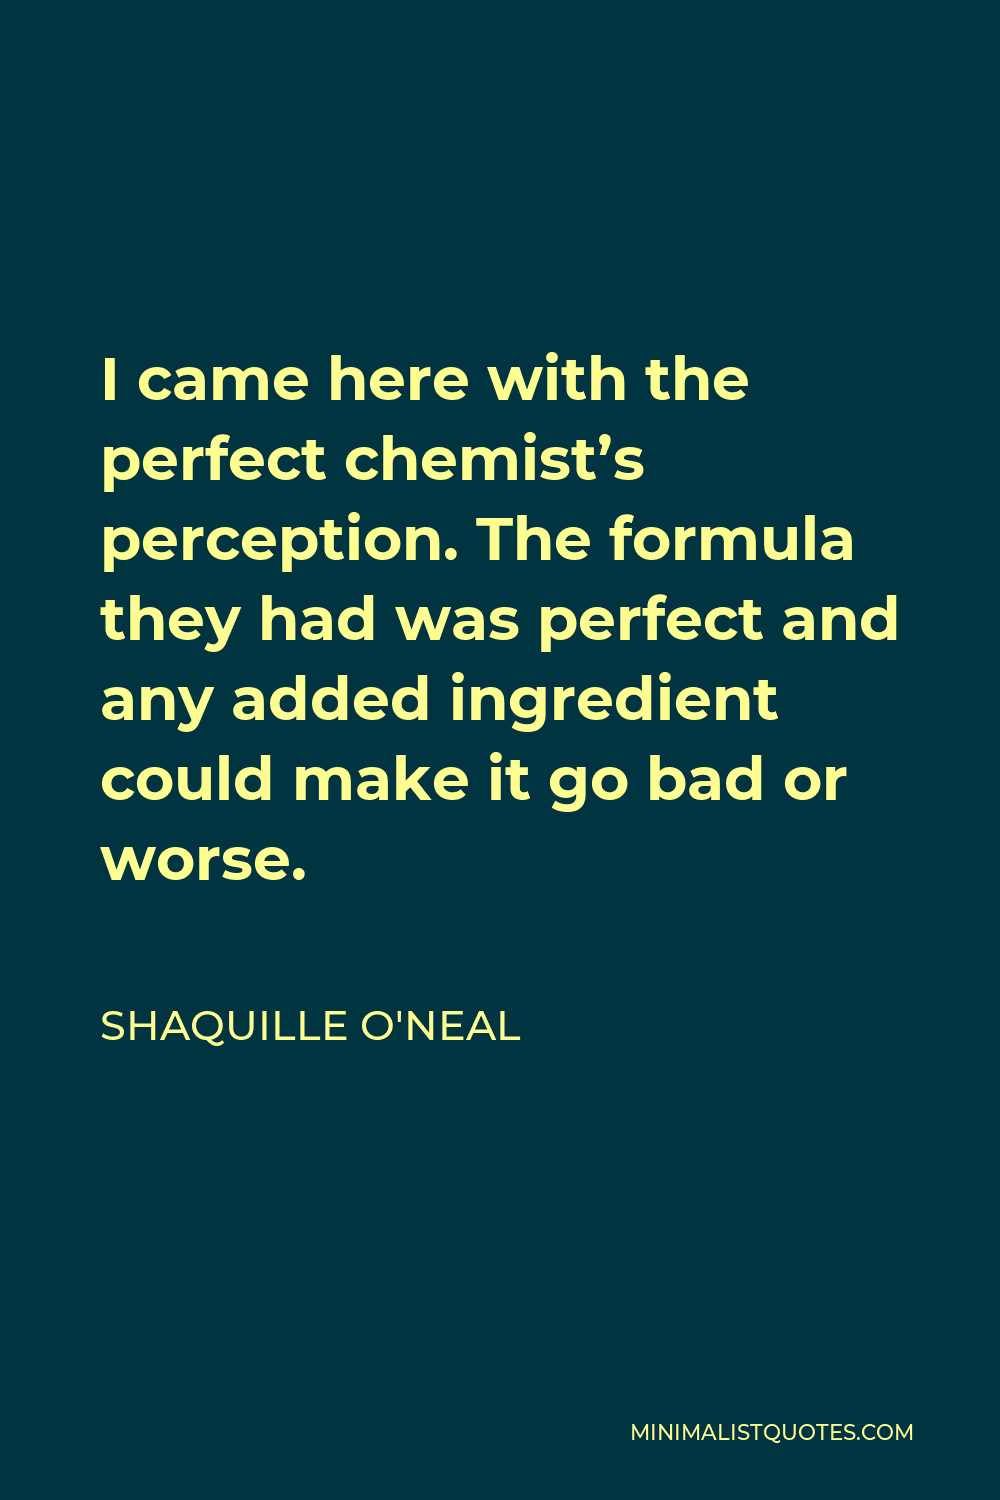 Shaquille O'Neal Quote - I came here with the perfect chemist’s perception. The formula they had was perfect and any added ingredient could make it go bad or worse.